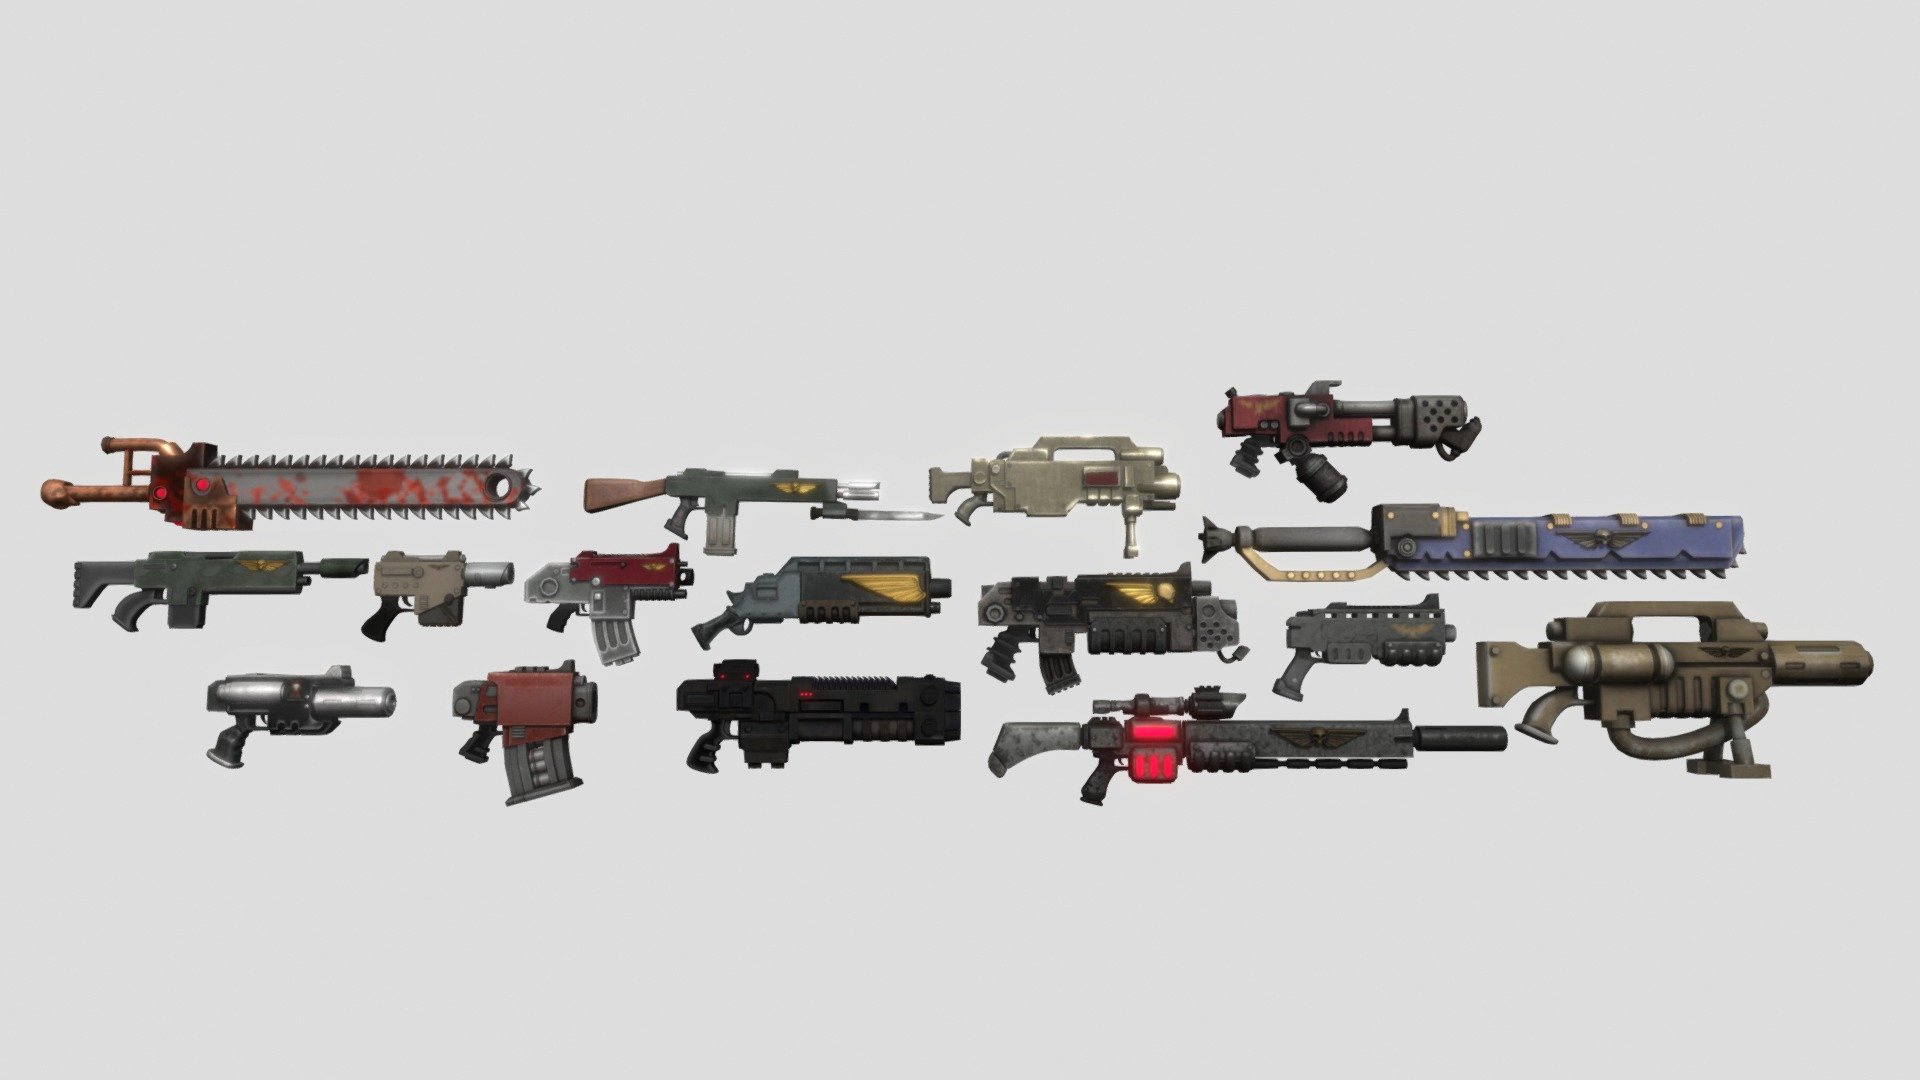 hello everyone i'm a fan of warhammer 40k I tried to create the definitive gun pack of this fiction universe, this pack have:

1.) 2 chainsaw sword 
2.) 3 imperial pistols 
3.) 3 space marine bolters 
4.) 1 imperial sniper
5.) 3 imperial rifles 
6.) 1 shootgun 
7.) 2 guard bolters 
8.) 1 flamethrower

this collection is so important for me because it took me so much time and I hope you enjoy.

thanks to read it :D

i’m a 3d modelator of colombia. if you want to contact me you can do in: juancamilojr0212@gmail.com or in discord: batman_comunista#3772 and follow me in instagram: https://www.instagram.com/juanjimenez0212/?hl=es-la - definitive warhammer pack of guns - Buy Royalty Free 3D model by mister_monopoly 3d model